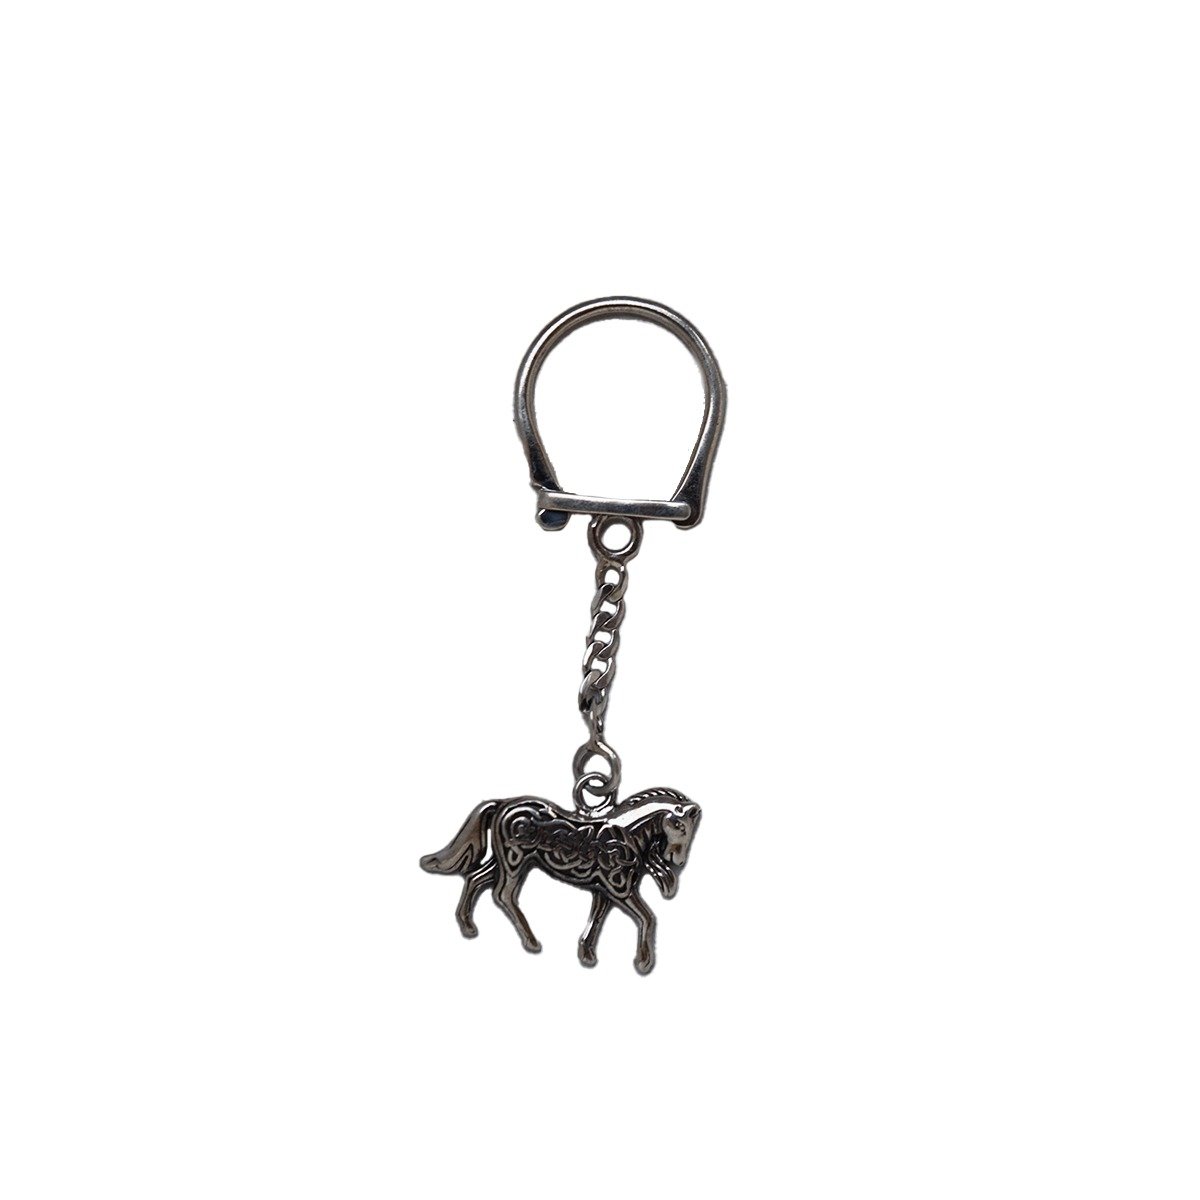 92.5 PURE SILVER HORSE KEYCHAIN